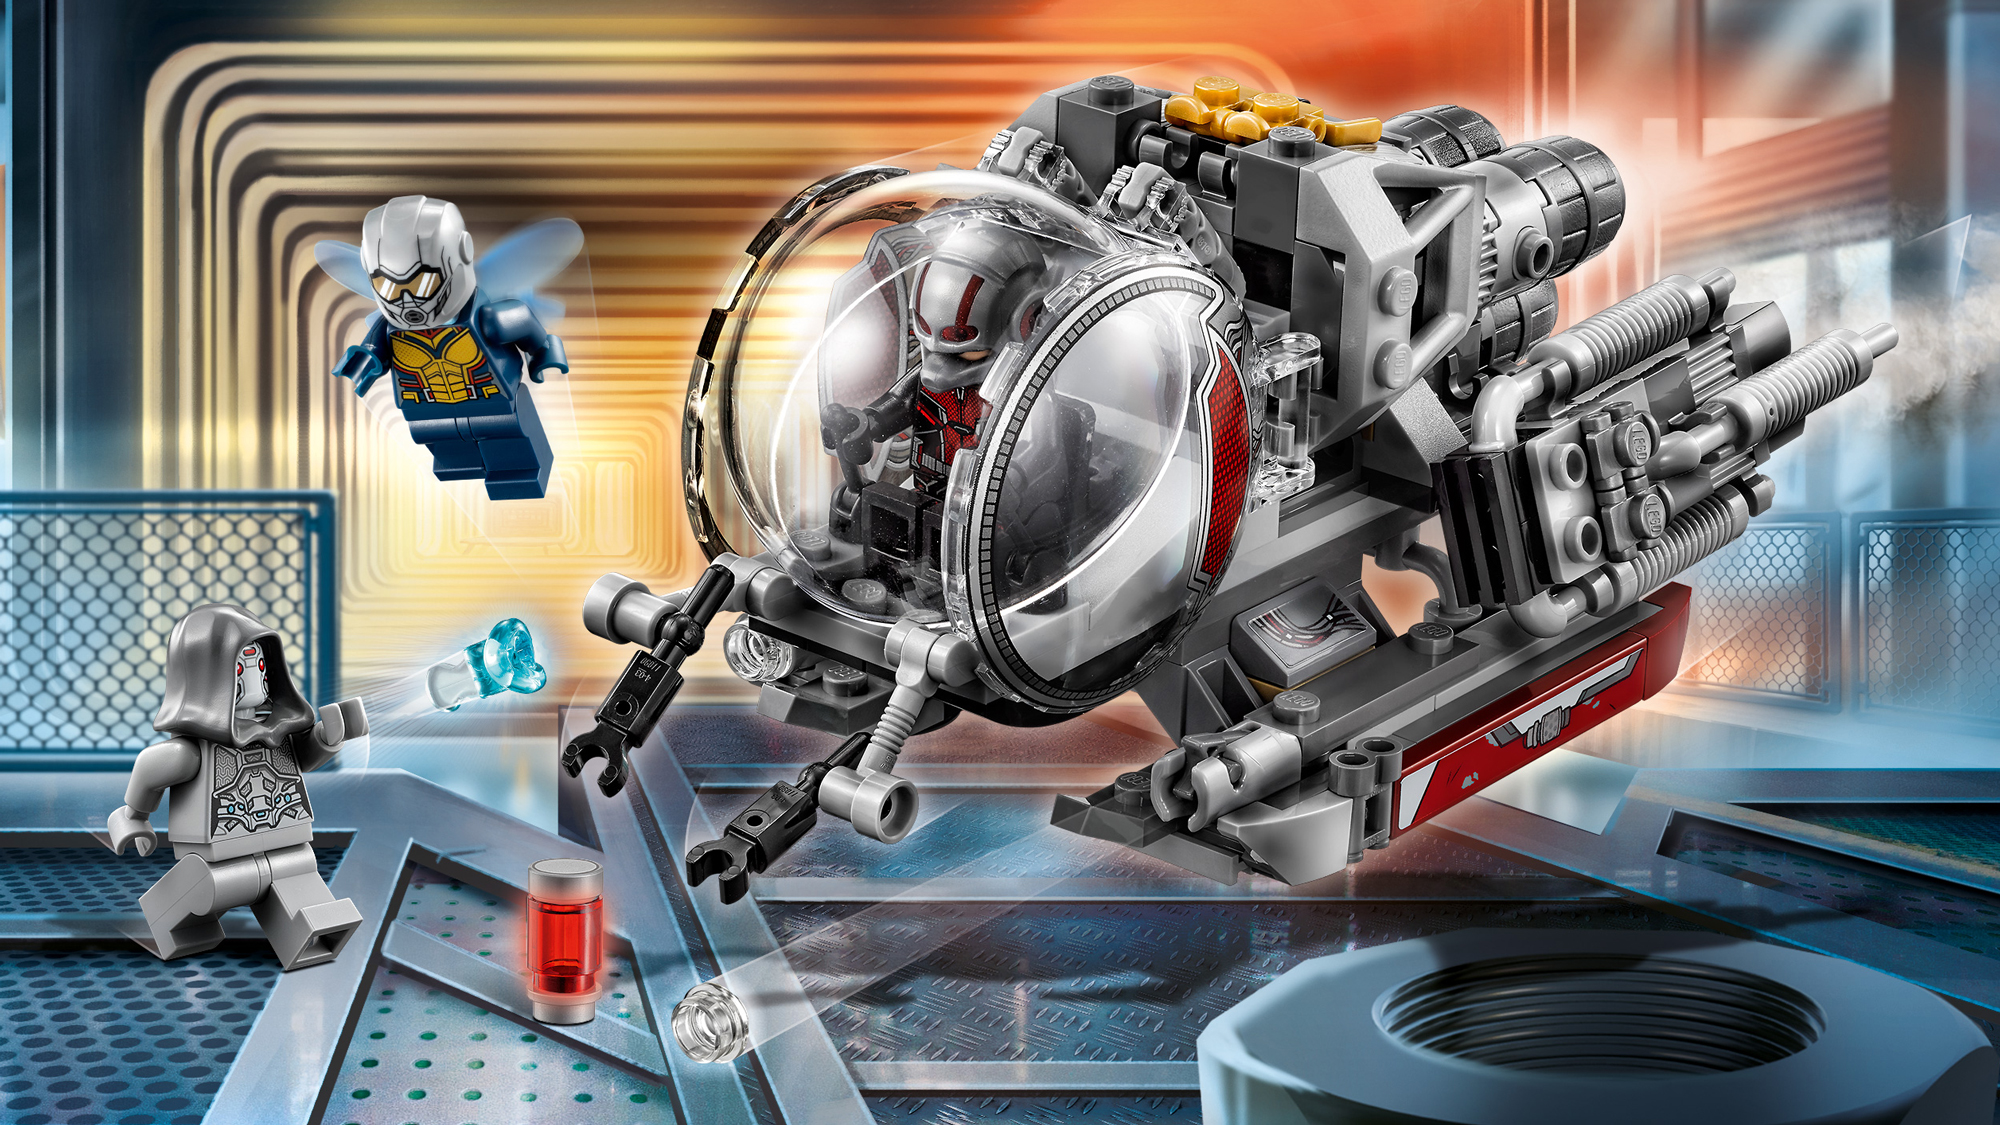 Ant-Man And The Wasp Gets A Snazzy LEGO Set, And More Of The Most Amazing Toys Of The Week